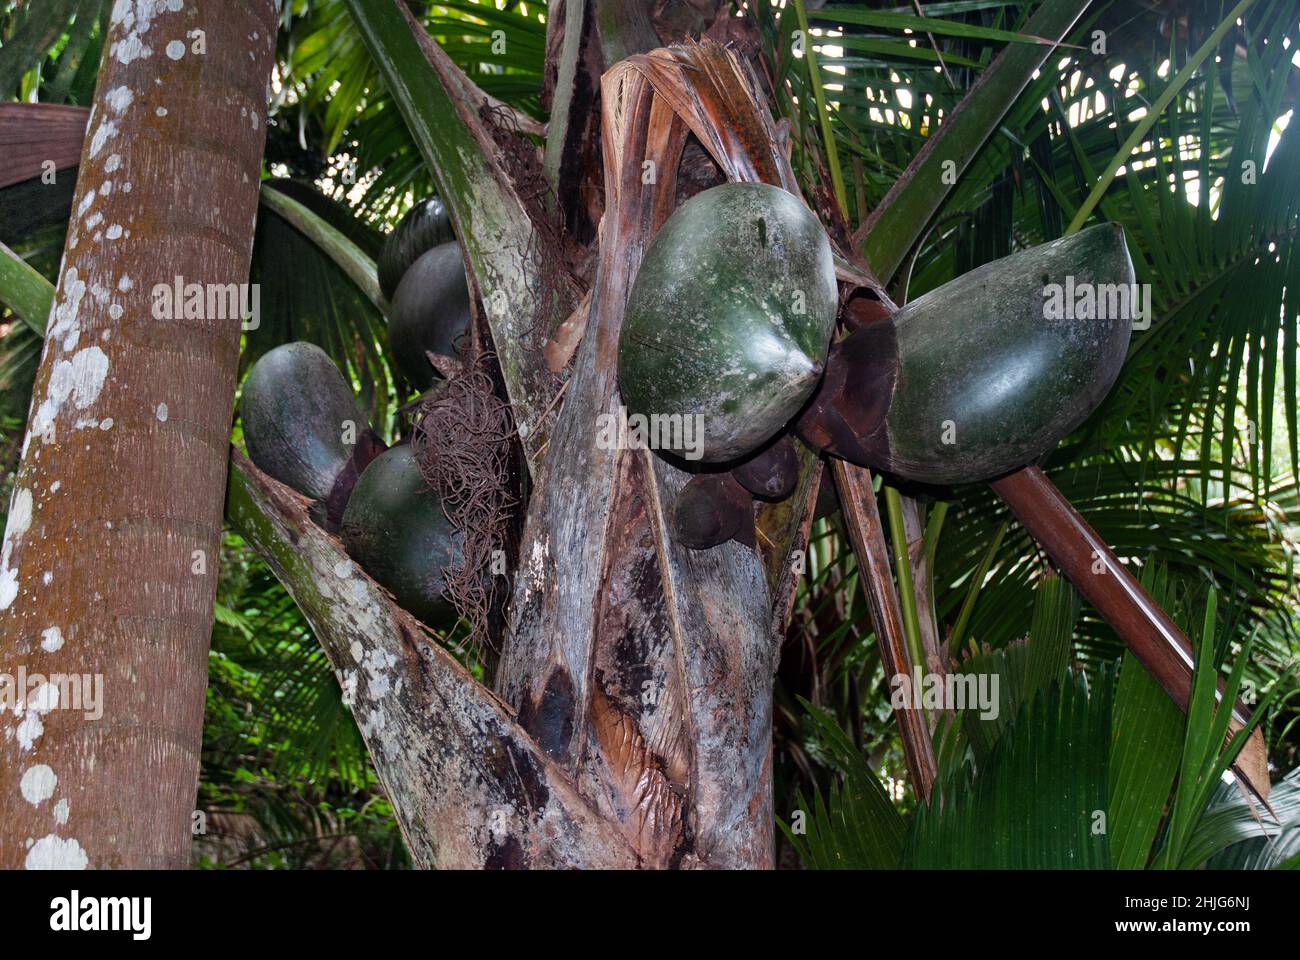 Lodoicea maldivica (coco de mer) is a species of palm endemic to the islands of Praslin and Curieuse in the Seychelles. It occurs in rainforest. Stock Photo